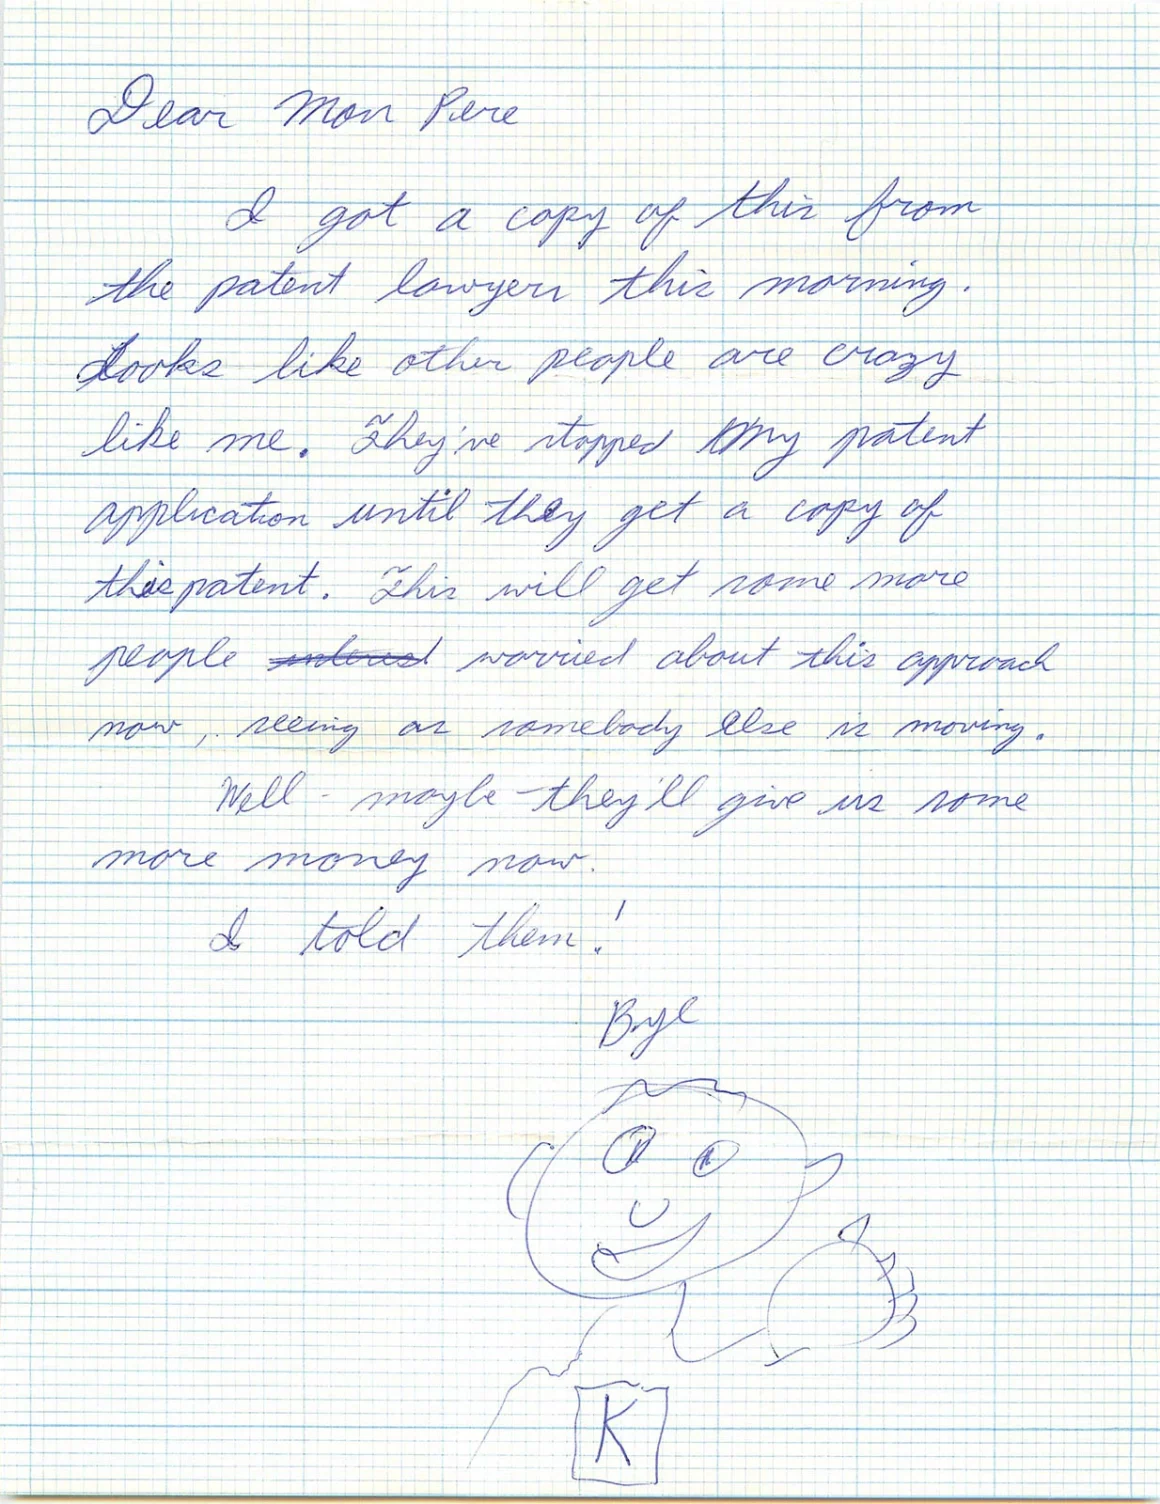 letter from sasson to father about digital camera patent